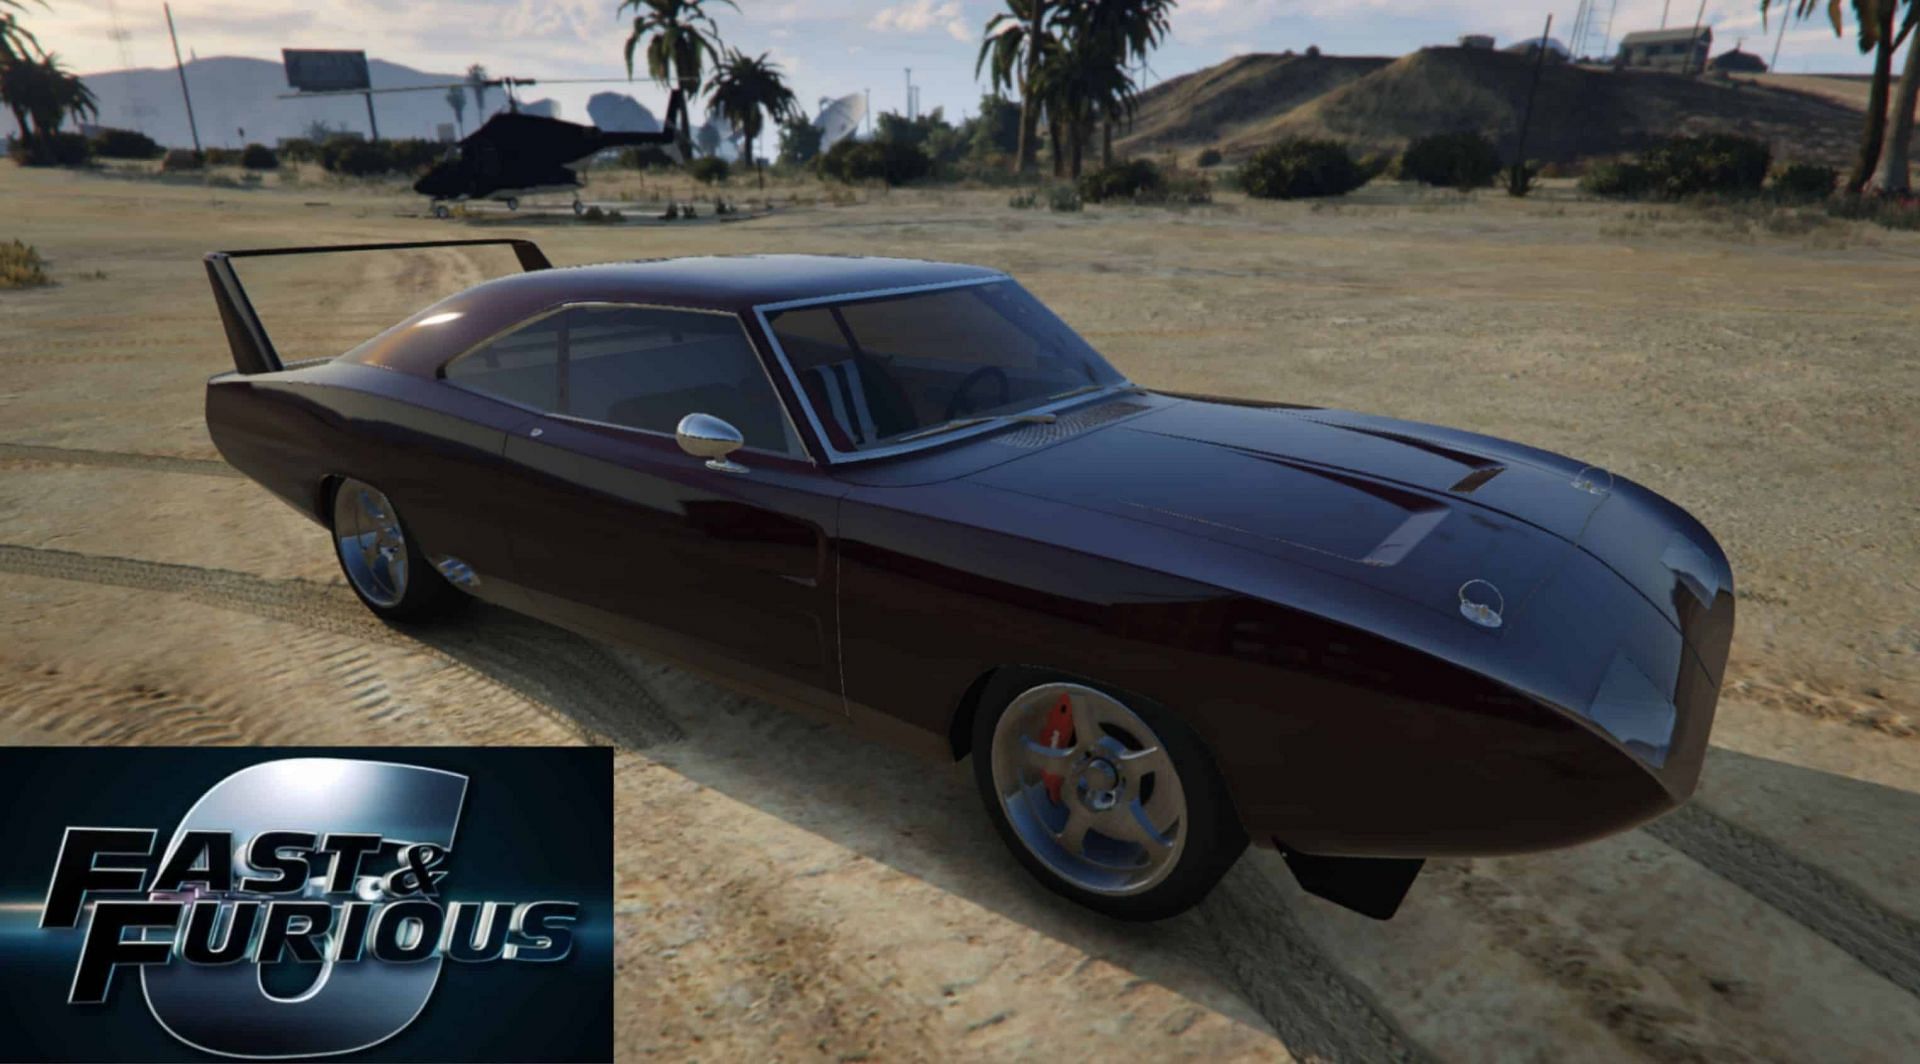 The Iconic Charger from the Fast and Furious Series in GTA [Image via gta5modhub]